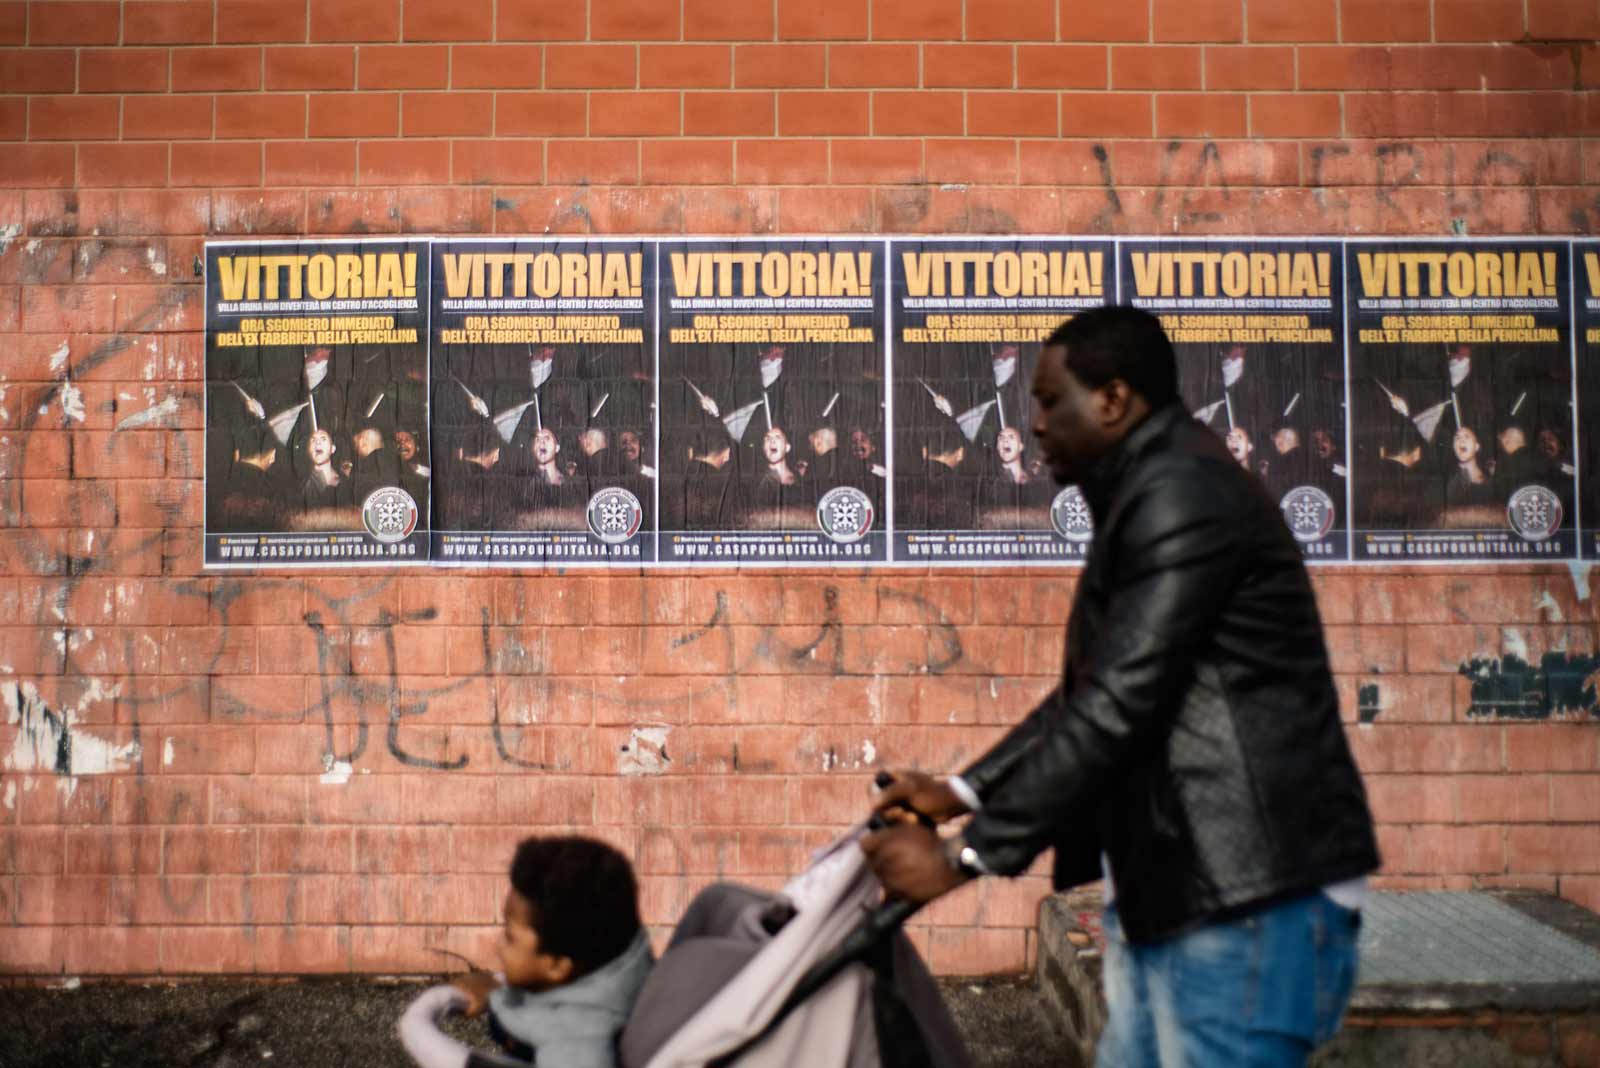 Posters by the fascist political party CasaPound calling for the eviction of the migrants and refugees living inside a former penicillin factory, Rome, November 26, 2018